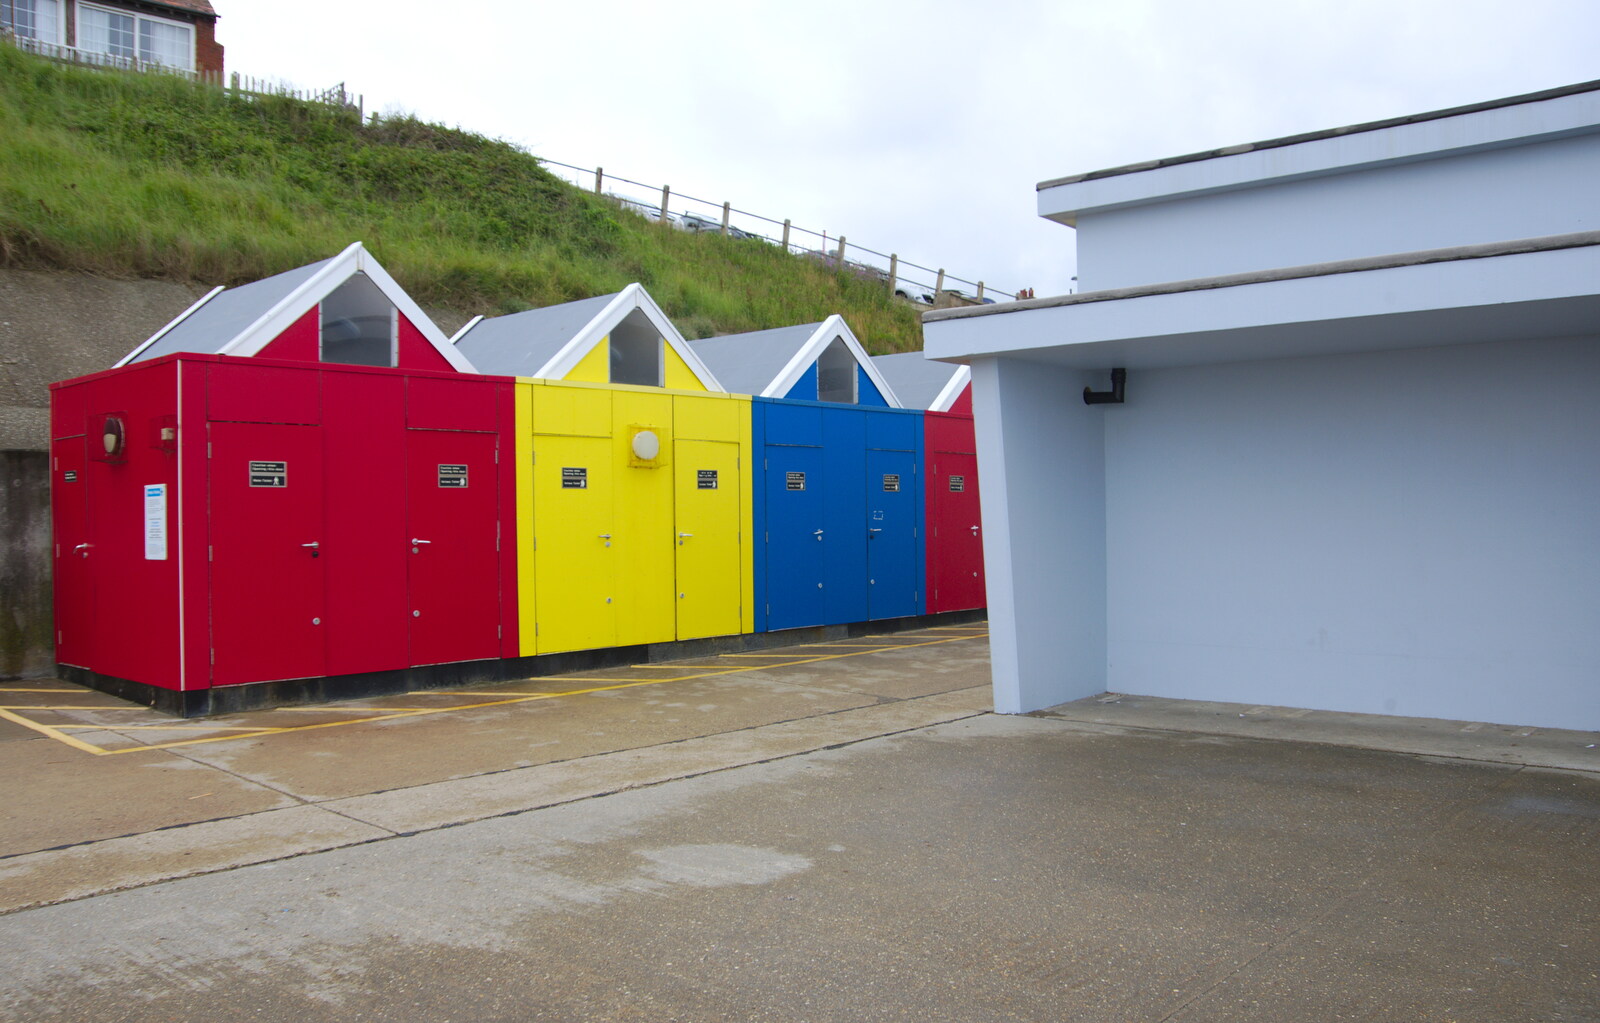 Colourful changing rooms from Kelling Camping and the Potty Morris Festival, Sheringham, North Norfolk - 6th July 2019